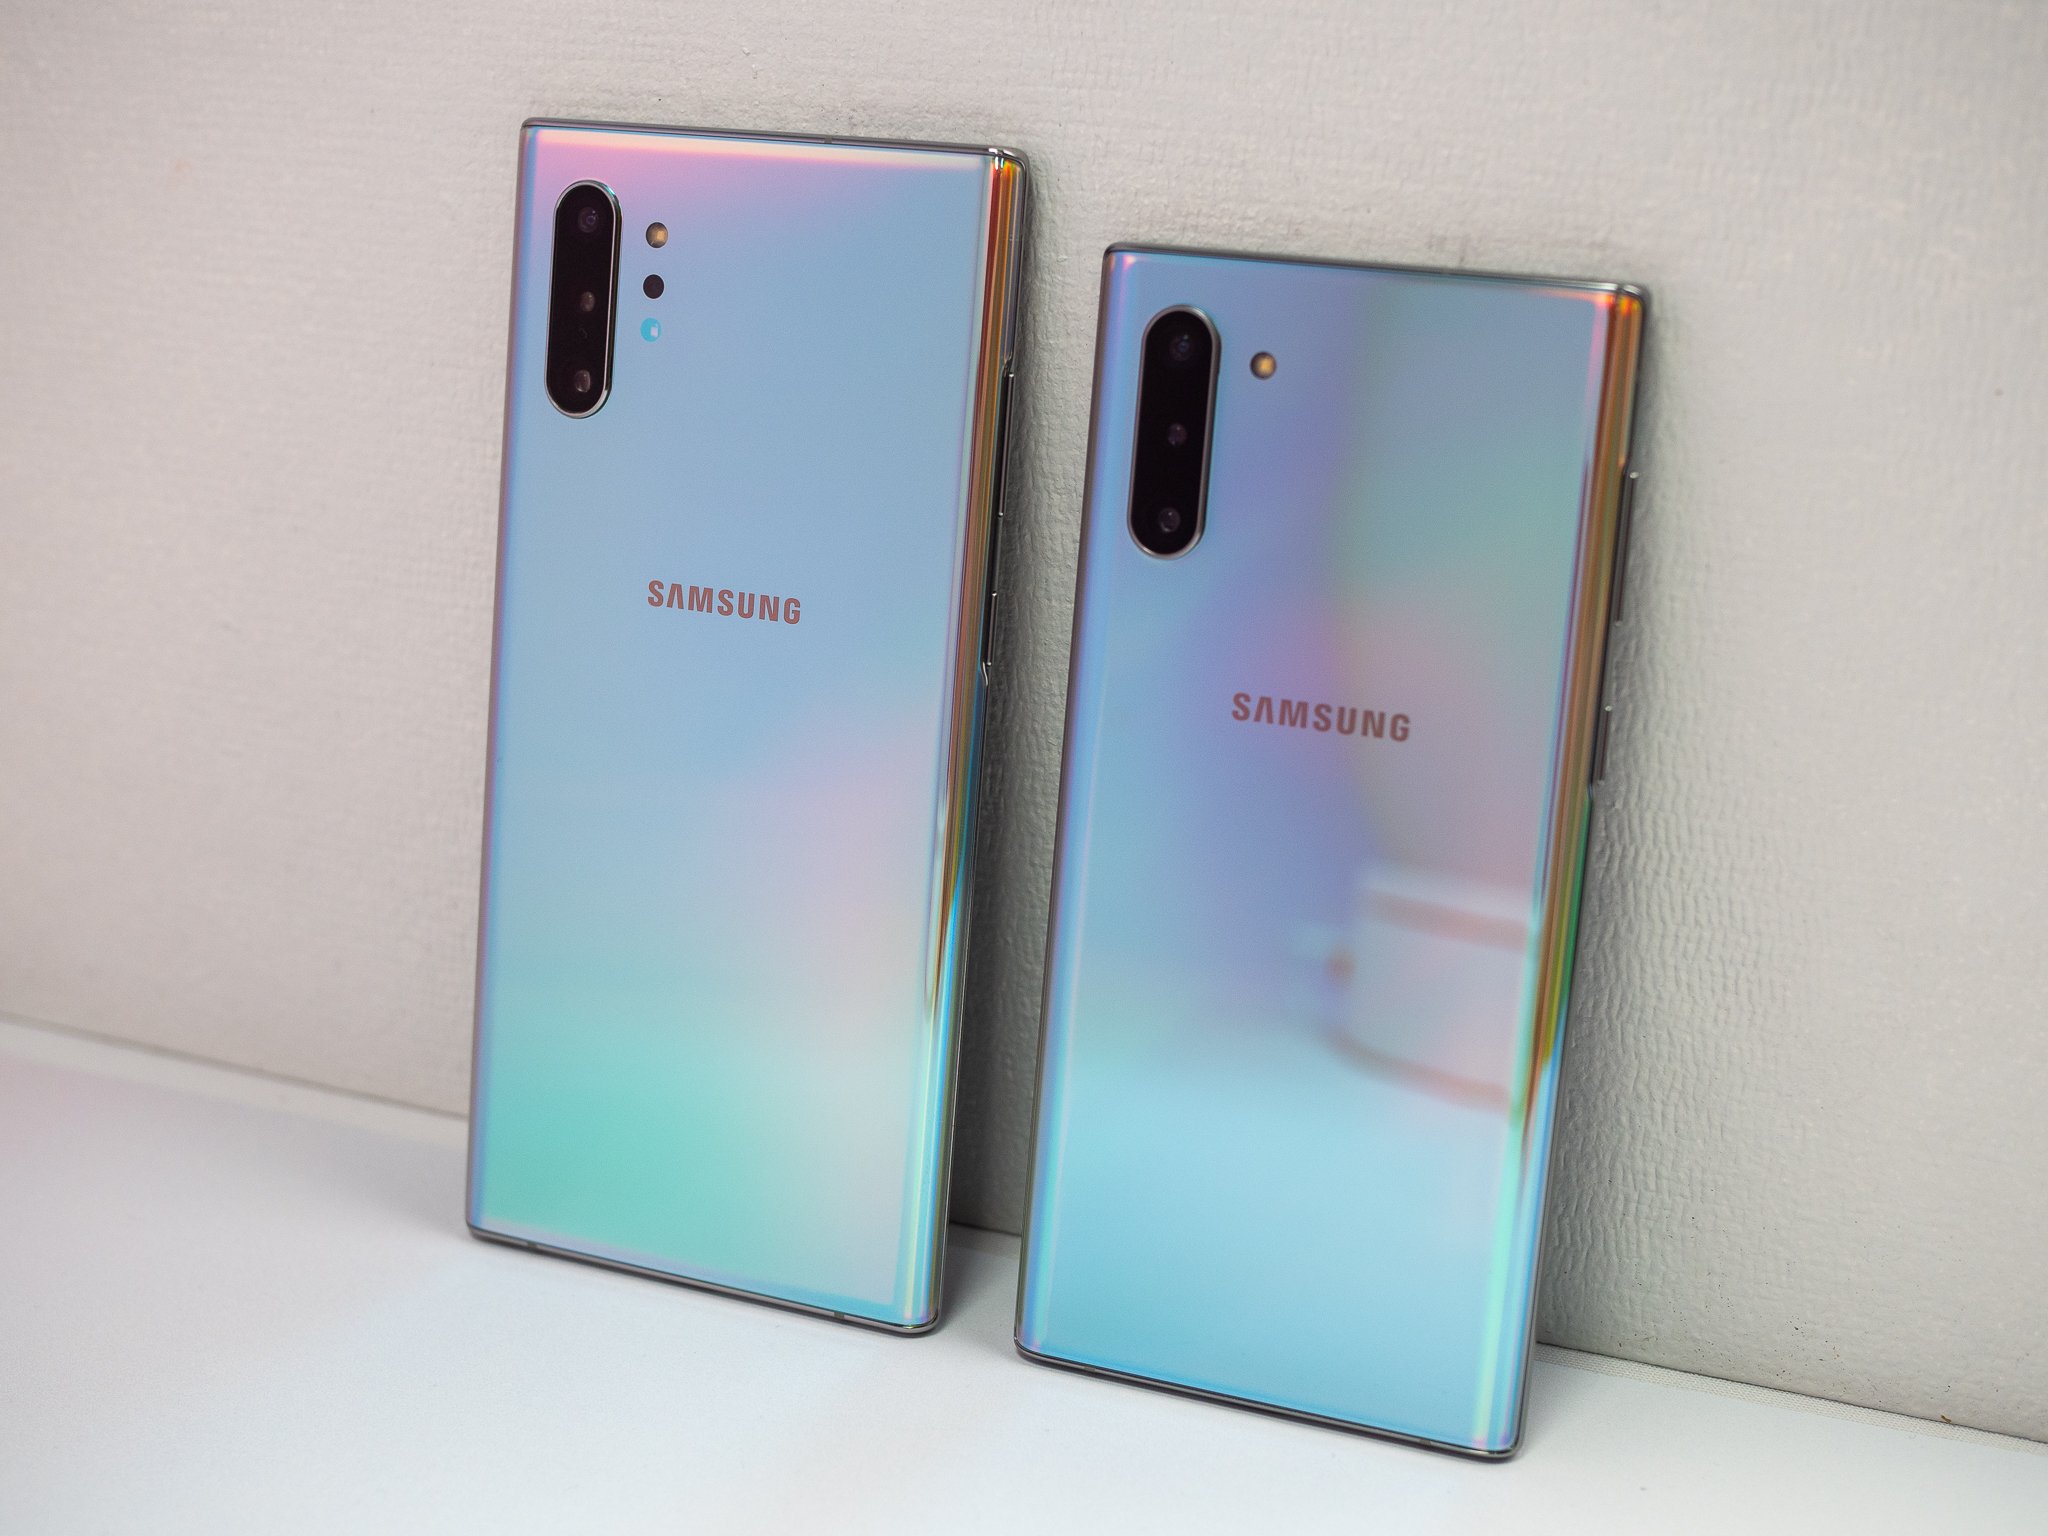 Samsung Galaxy Note 10 Plus review: Bigger, better, more expensive